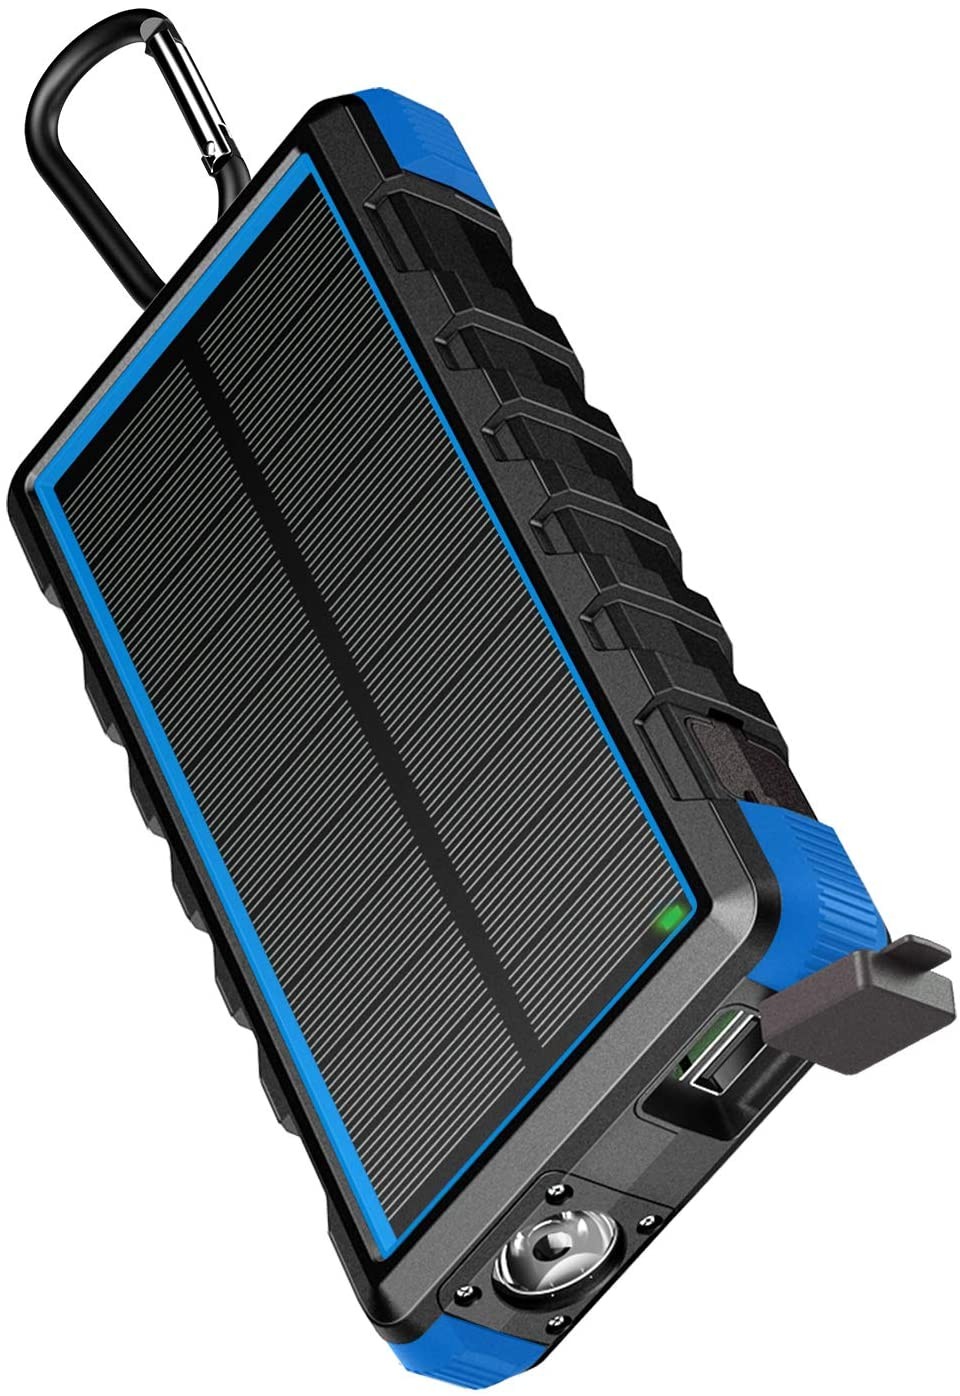 24000mAh Cell Phone Portable Solar Power Supply Energy Storage Battery Charger Power Bank Rugged